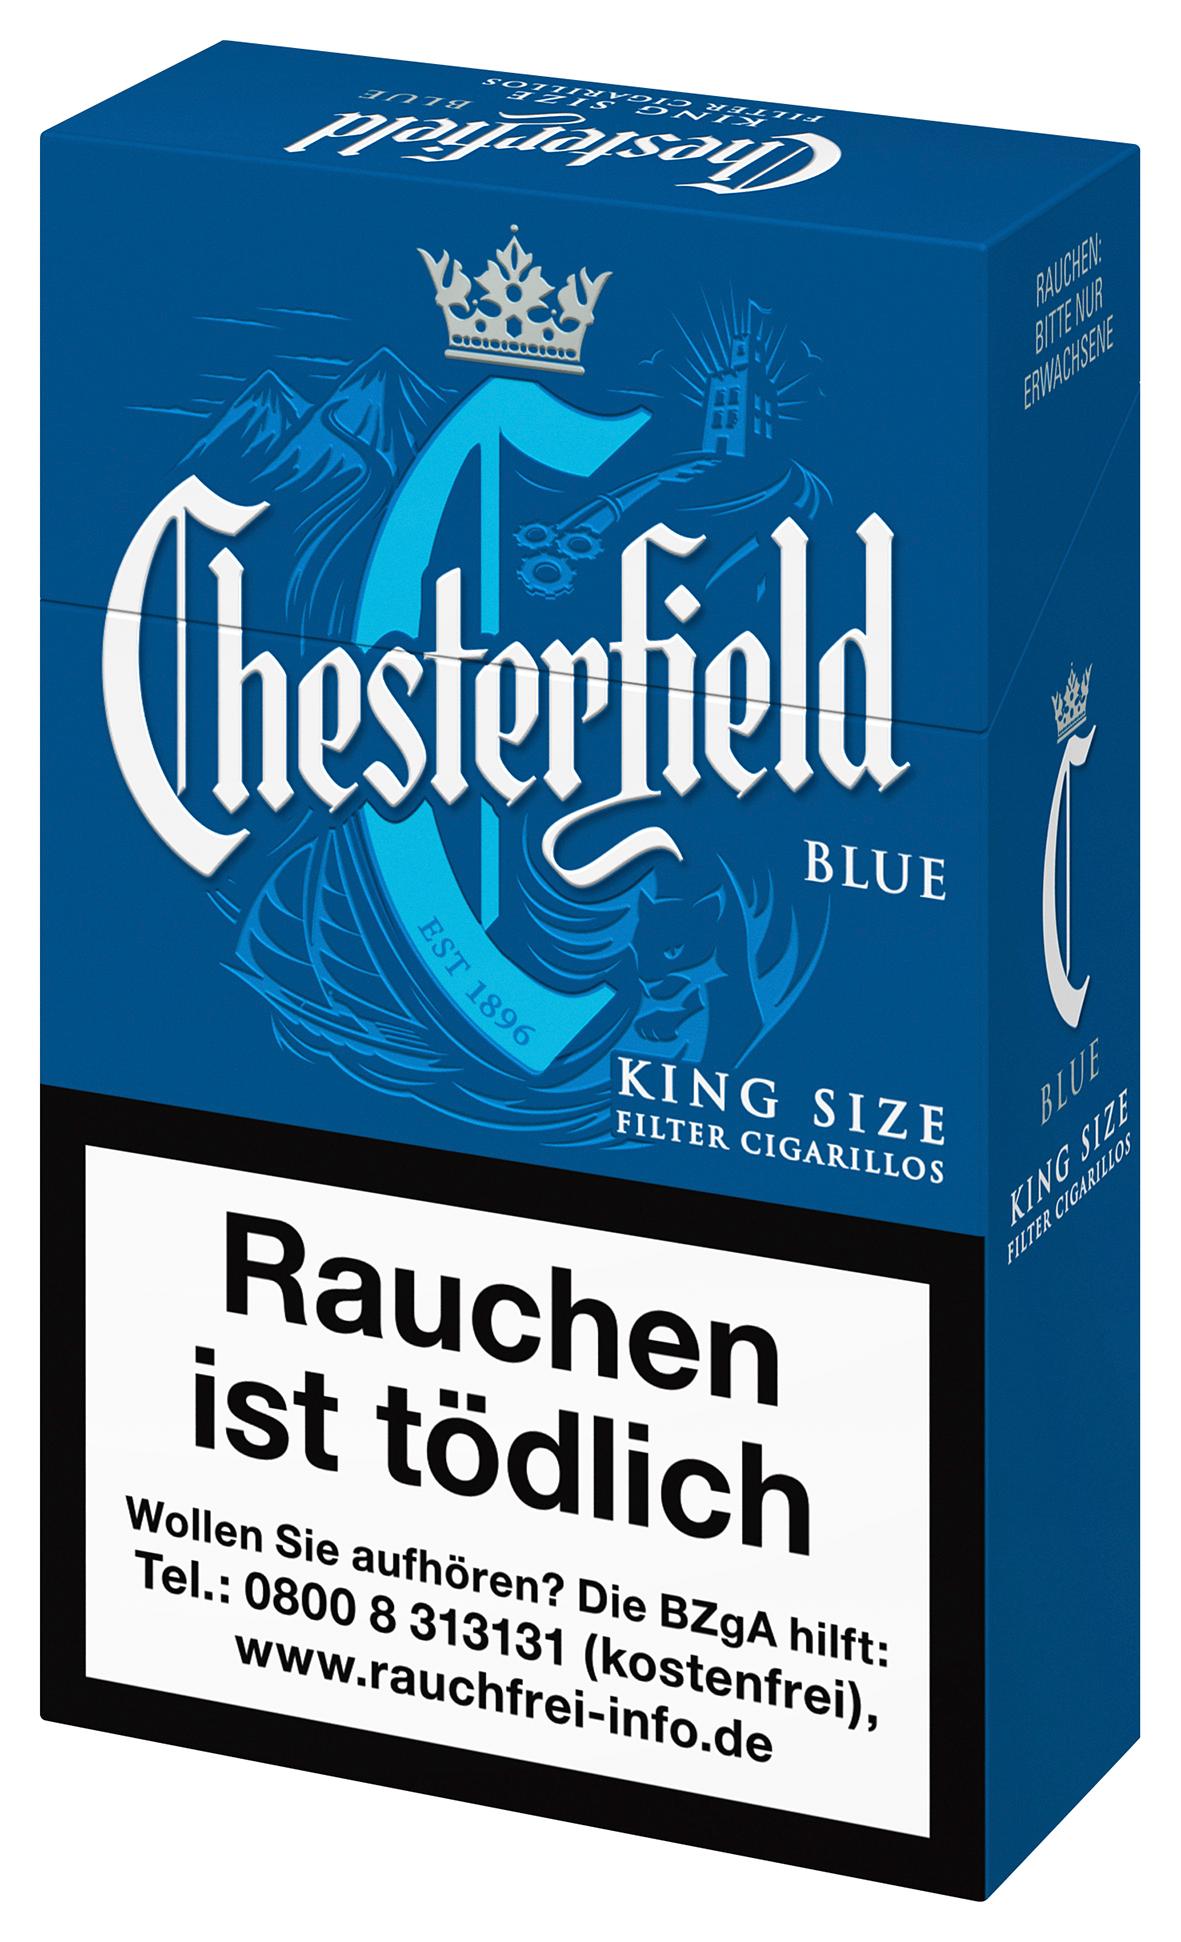 Chesterfield Zigarillos Blue King Size 1 Packung